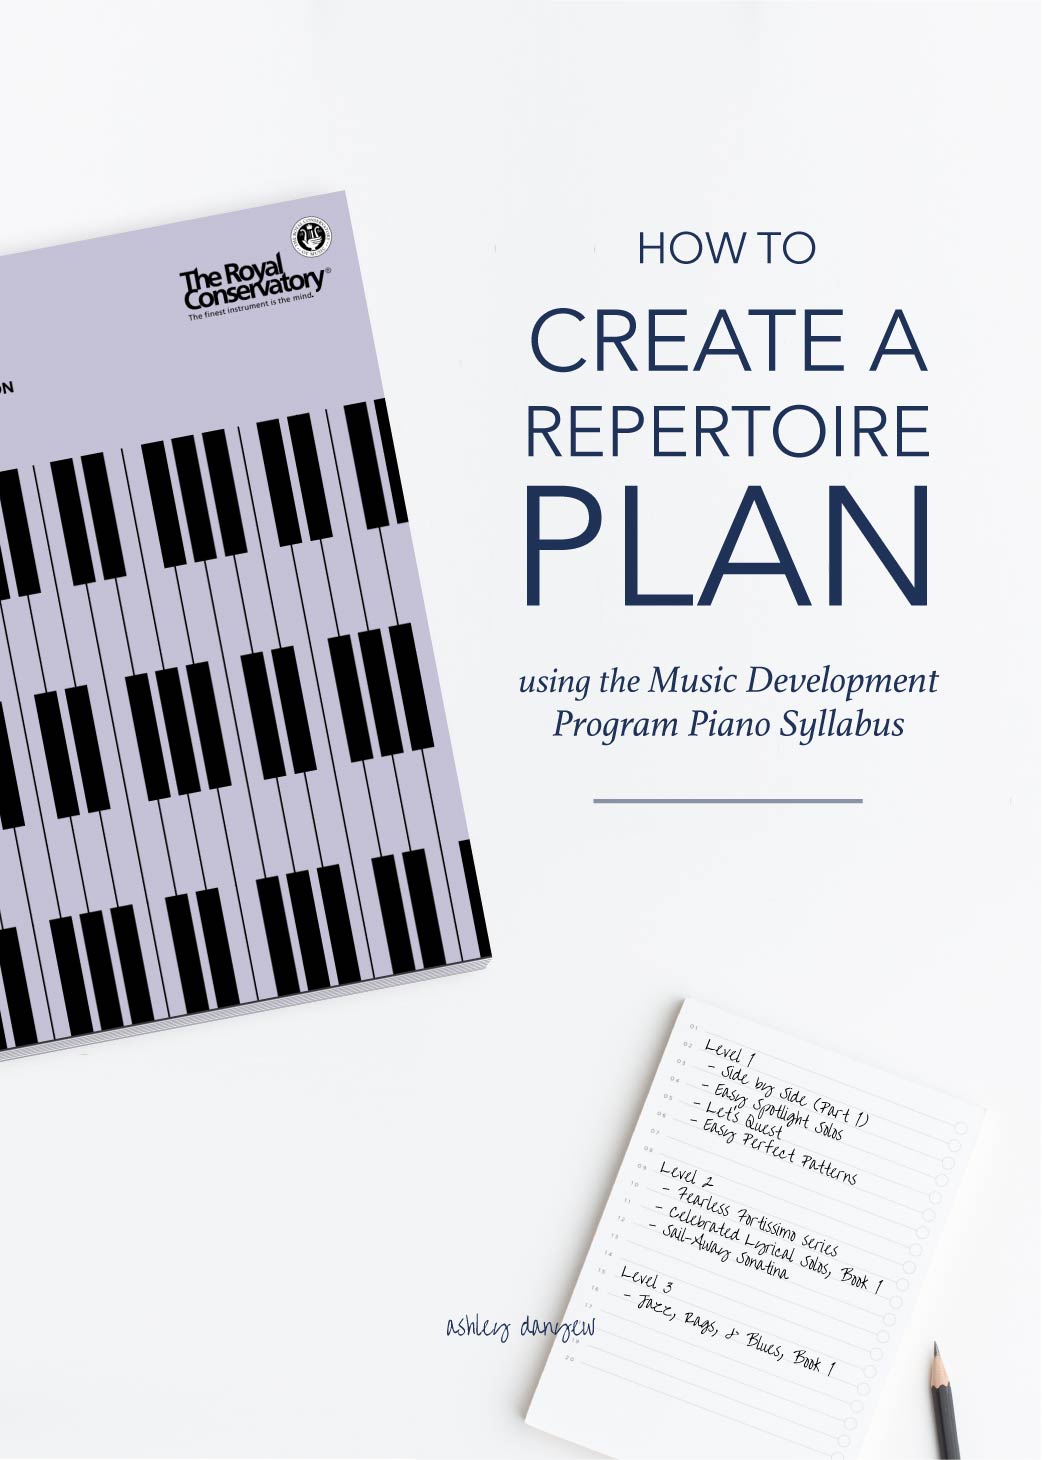 How to Create a Repertoire Plan Using the Music Development